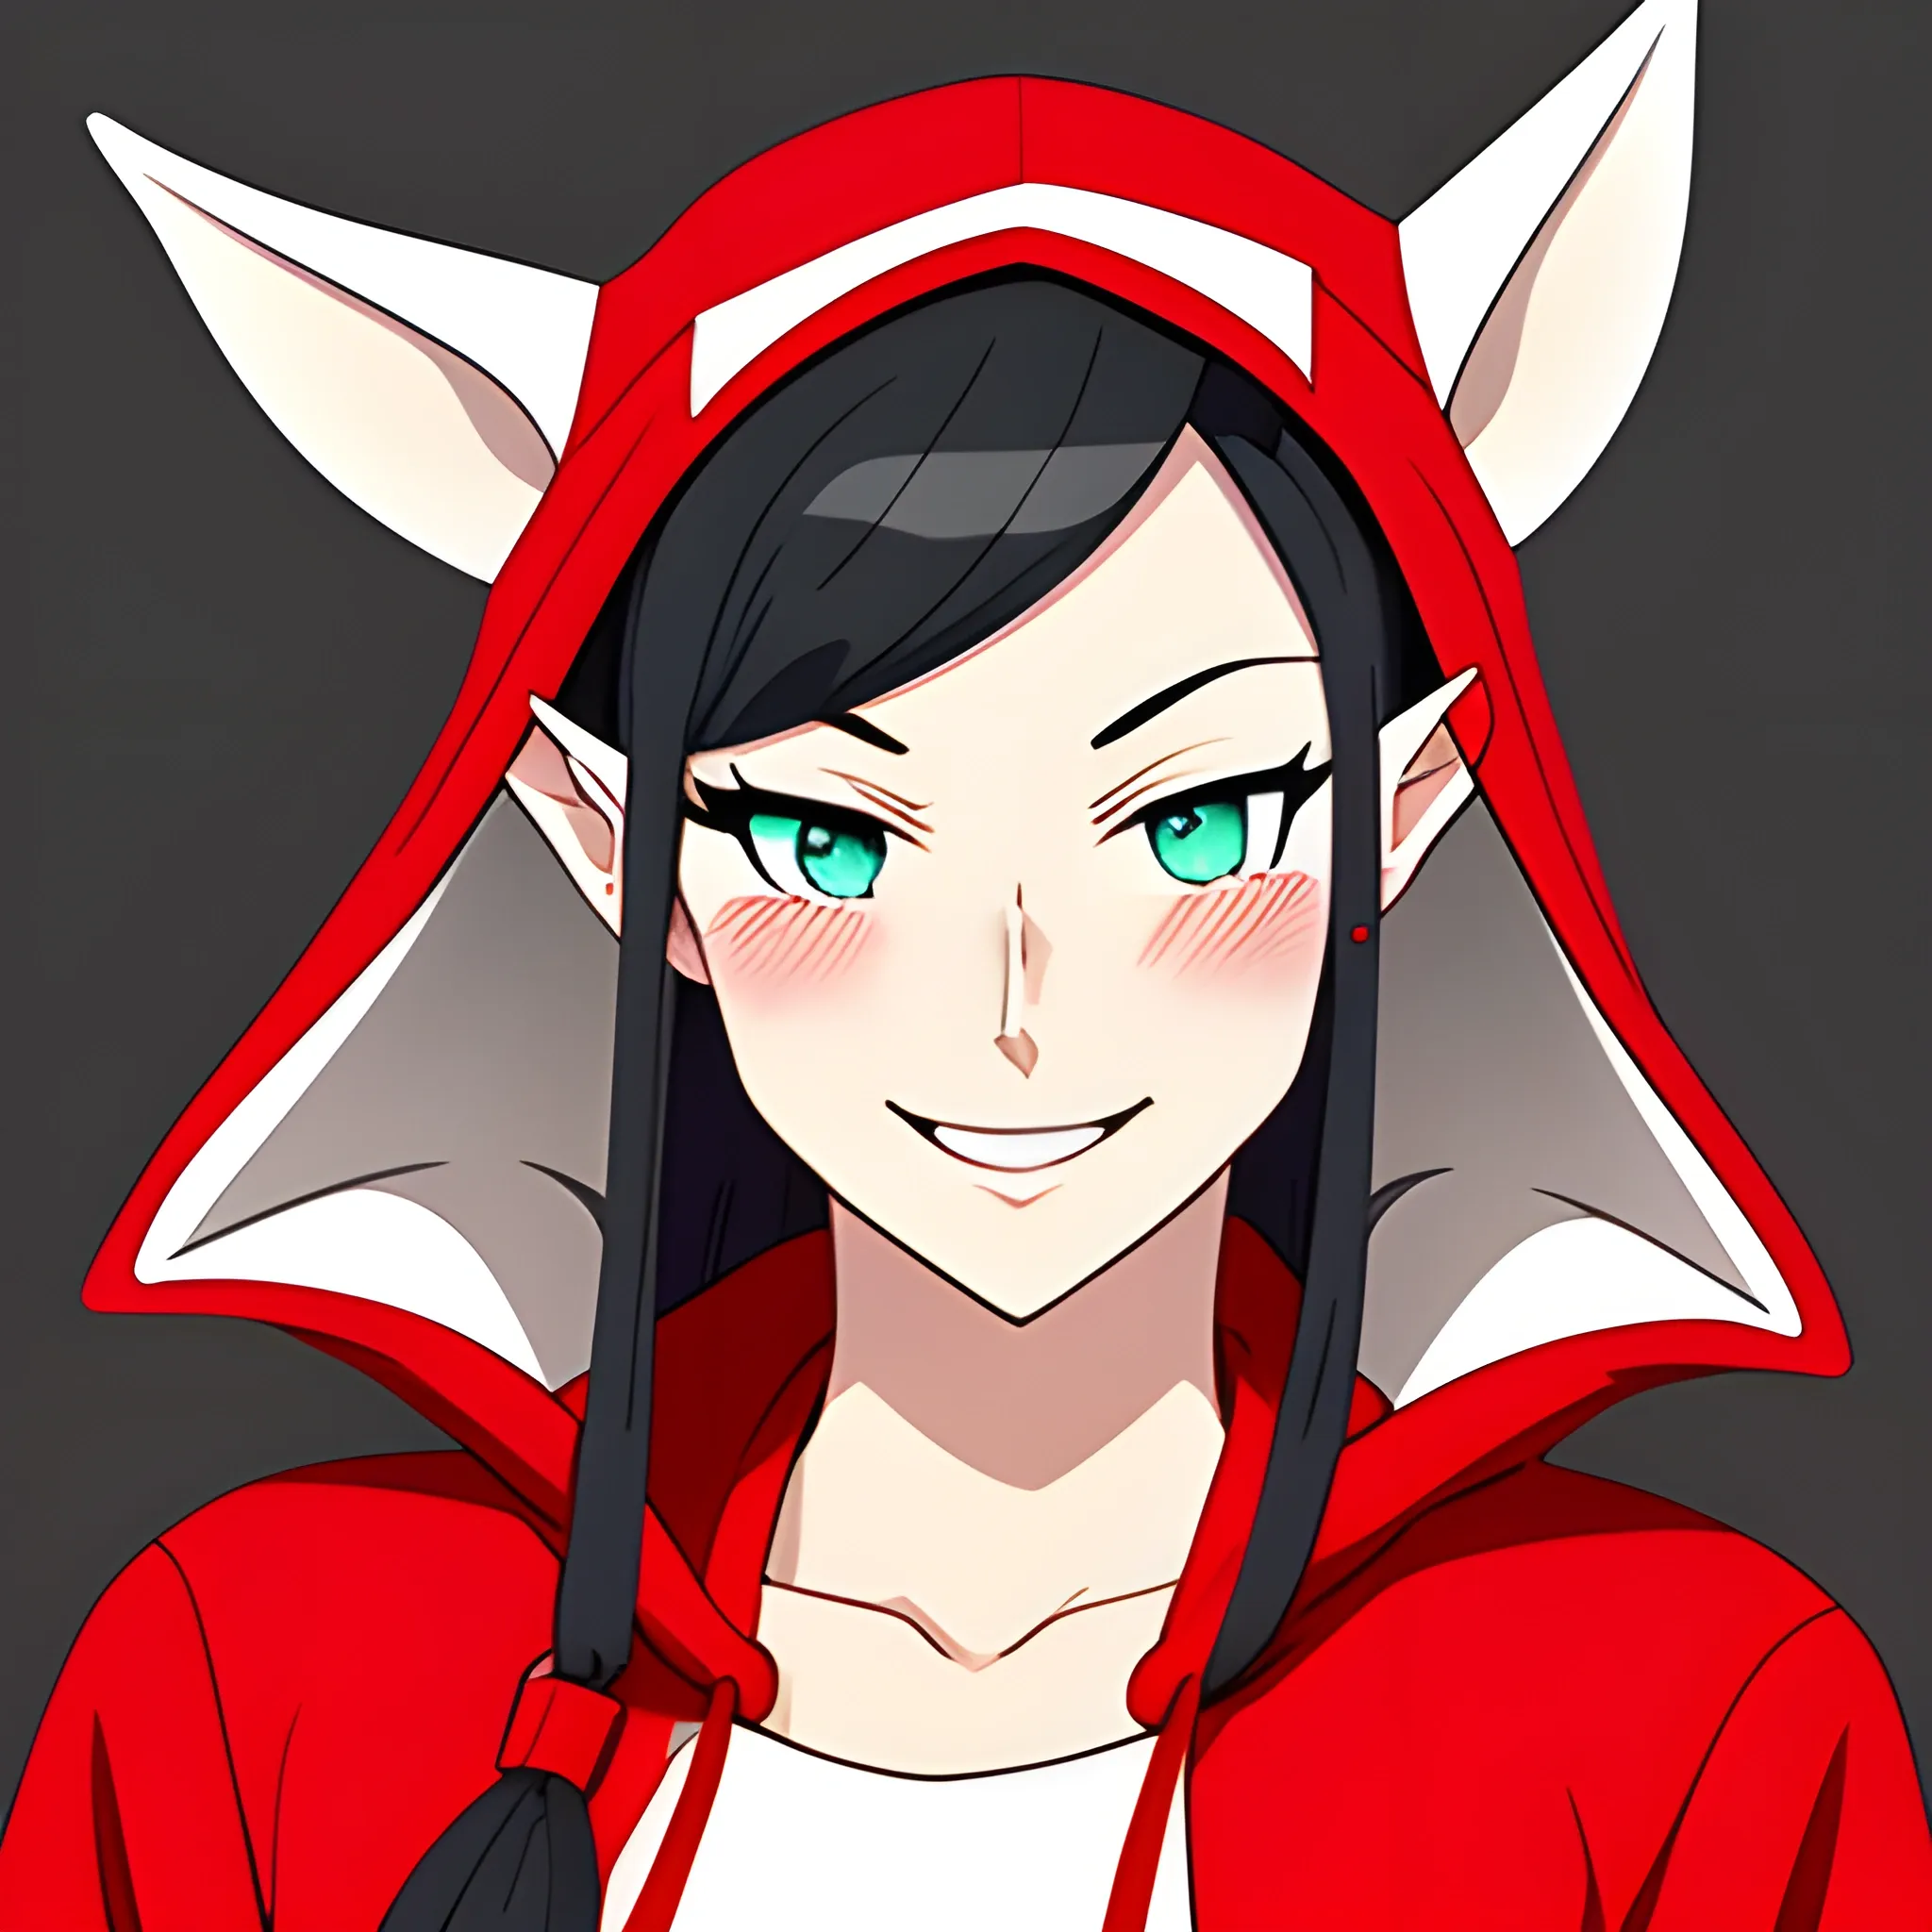  have elf ears,girl,double ponytail hair,red hat and hooded clothes and red schoolbag,happy expression, Cartoon, Cartoon,very cute,little kid,happy face,five years old,five years old,Japanese,animation style, Cartoon, Cartoon